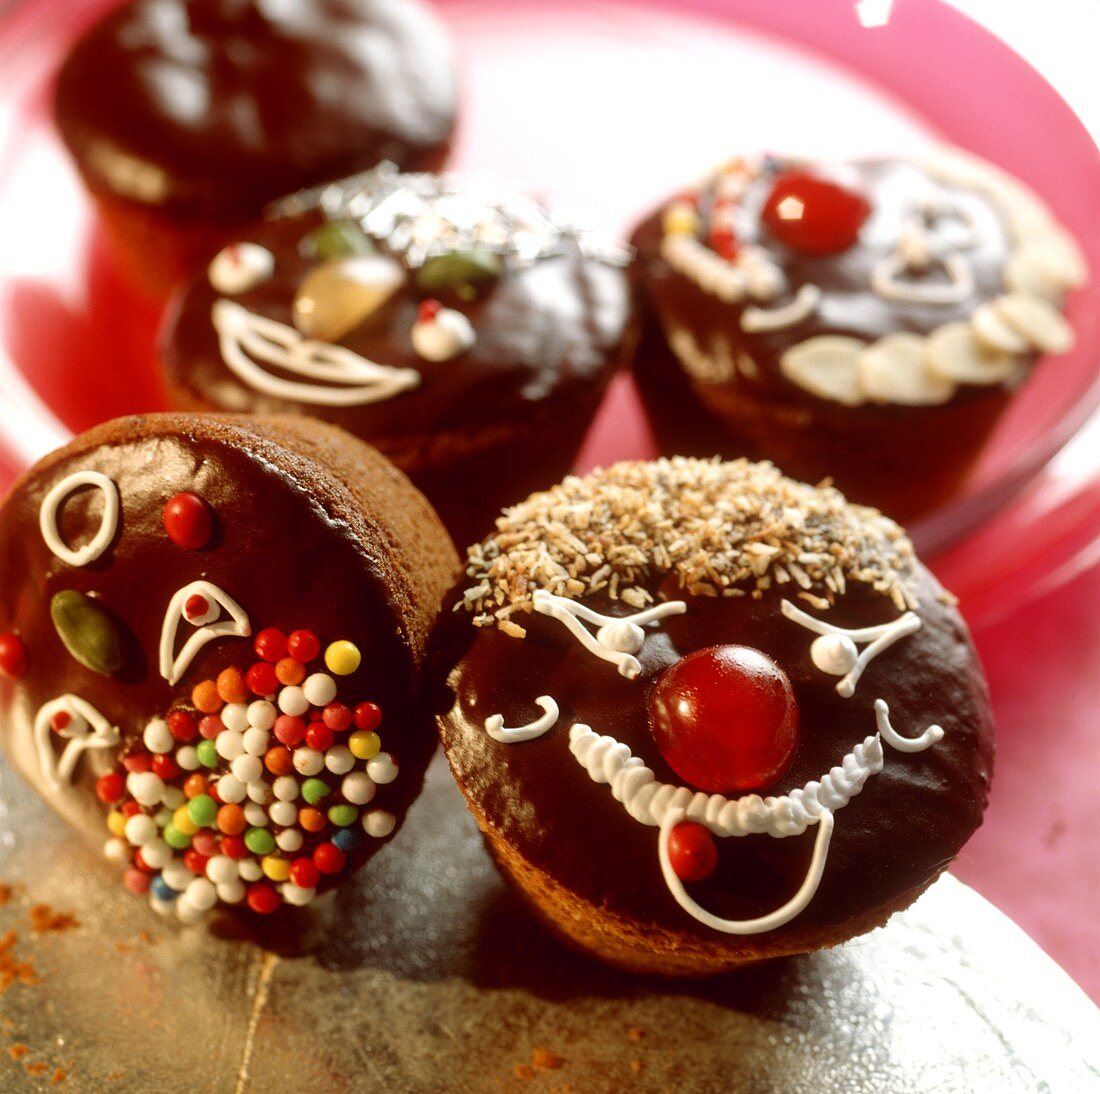 Chocolate muffins with faces